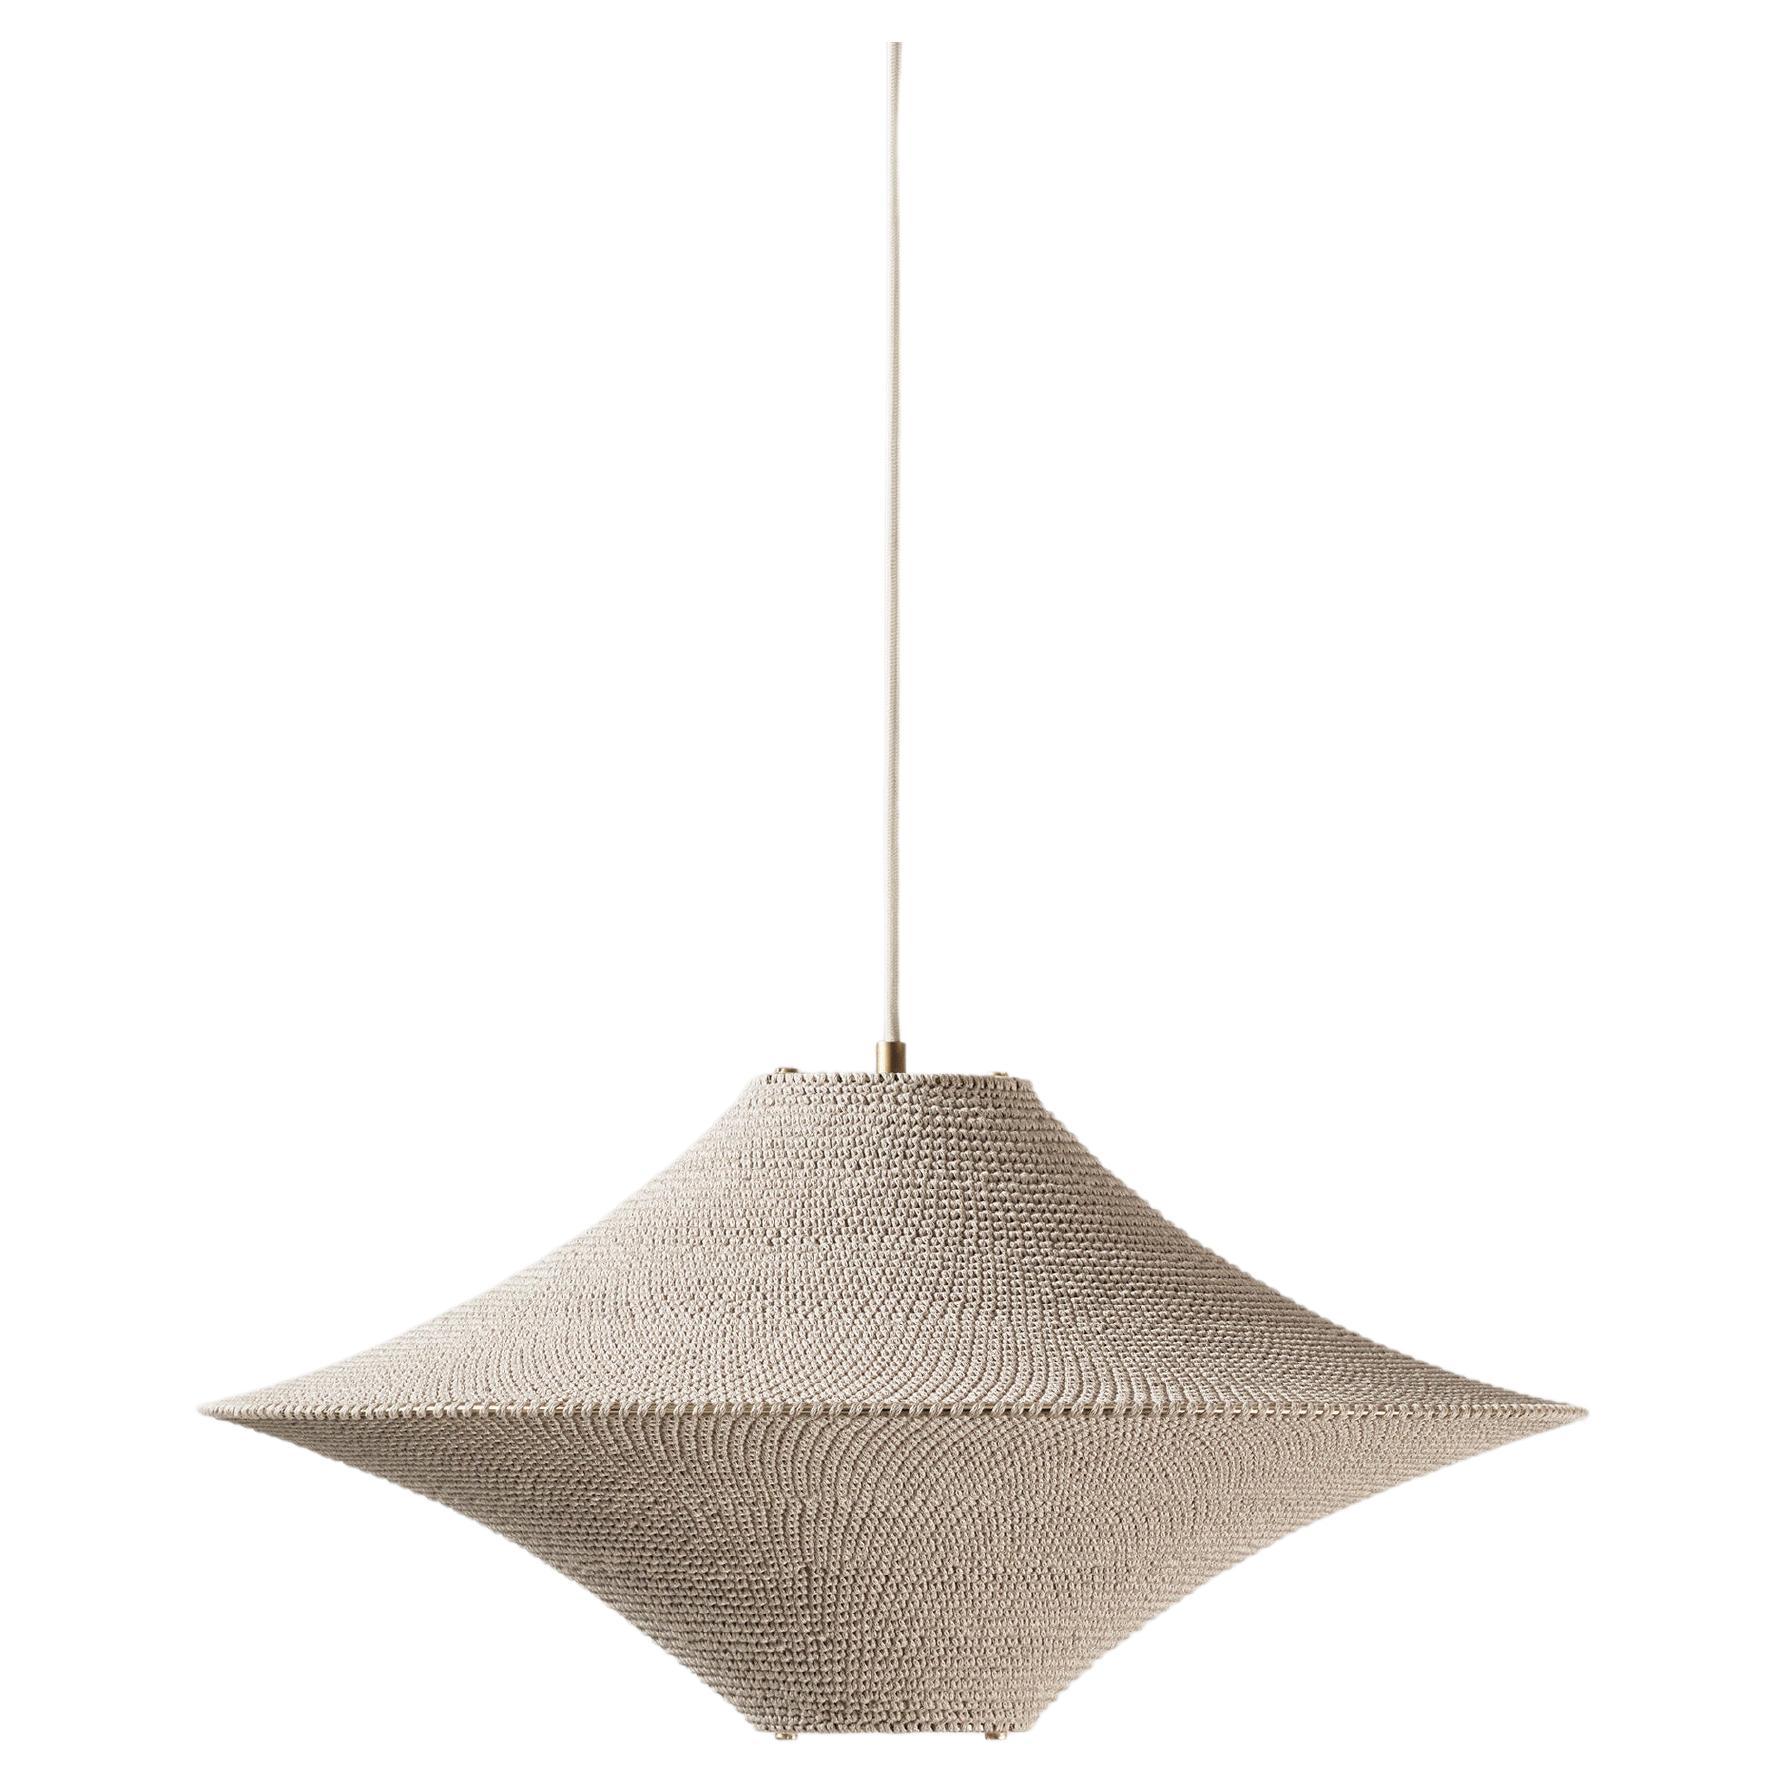 SOLITAIRE 01 Pendant Light Ø100cm/39.4in, Hand Crocheted in Egyptian Cotton